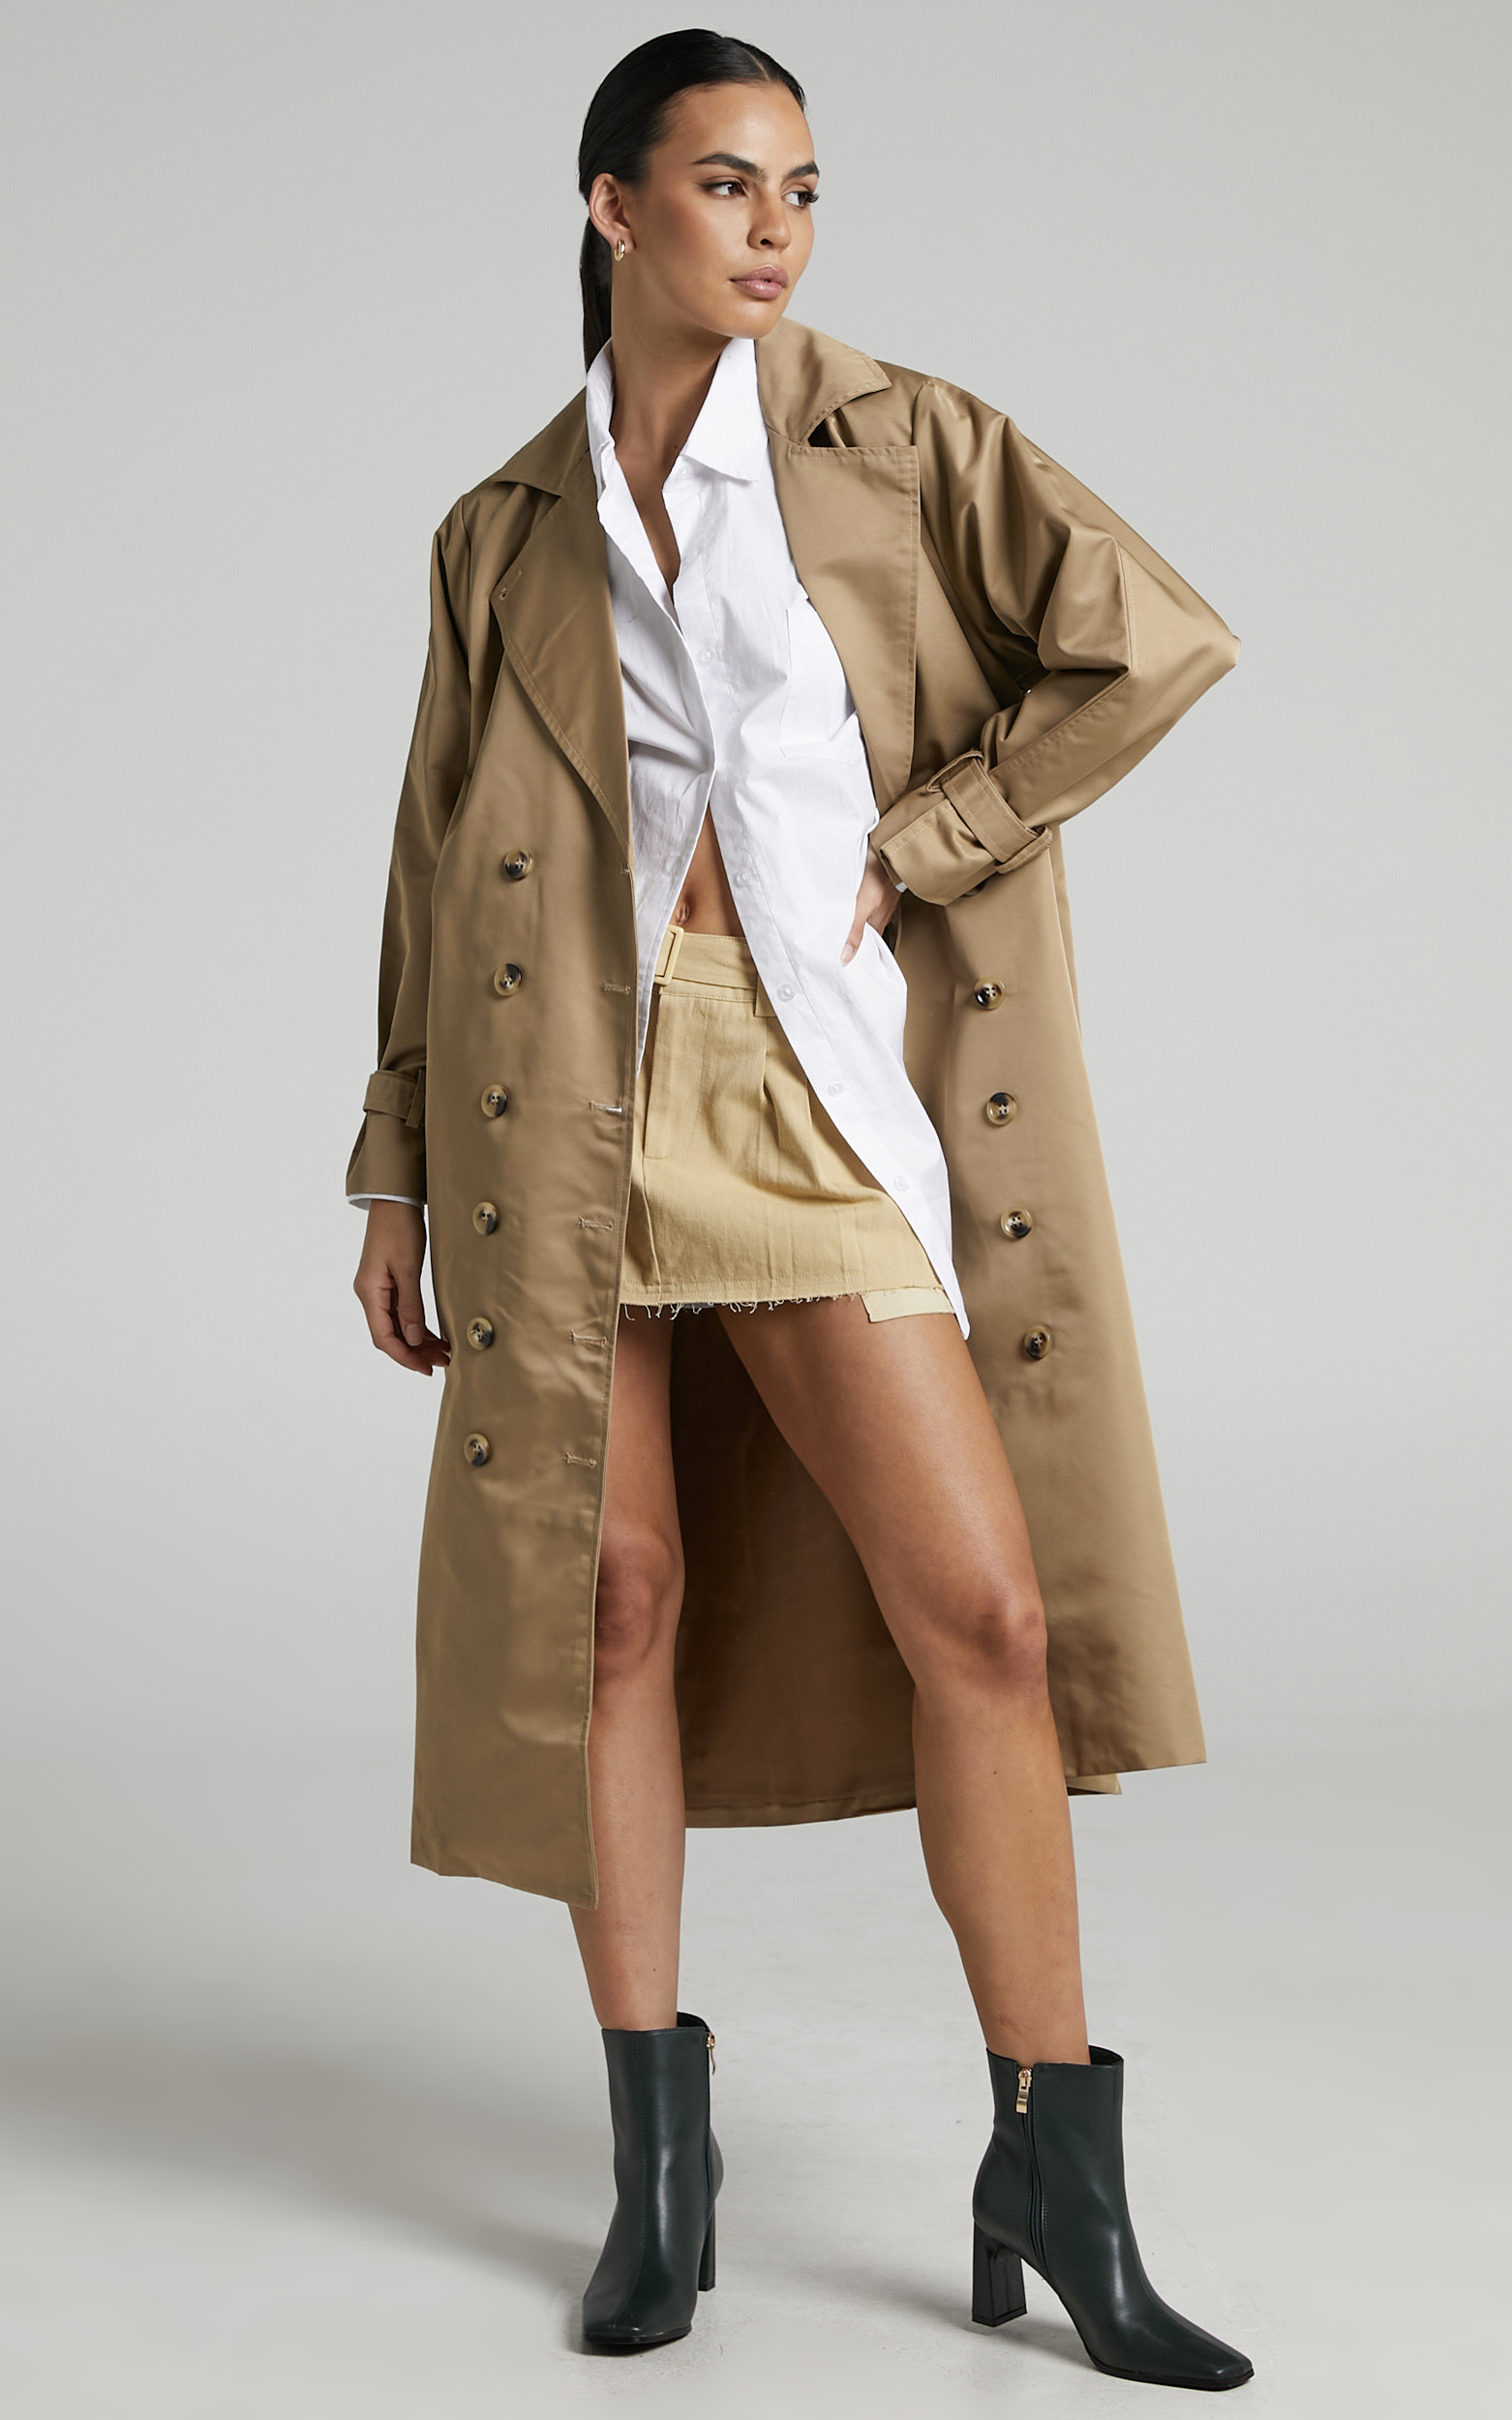 Lliana Double Breasted Trench Coat in Tan - 06, BRN1, hi-res image number null